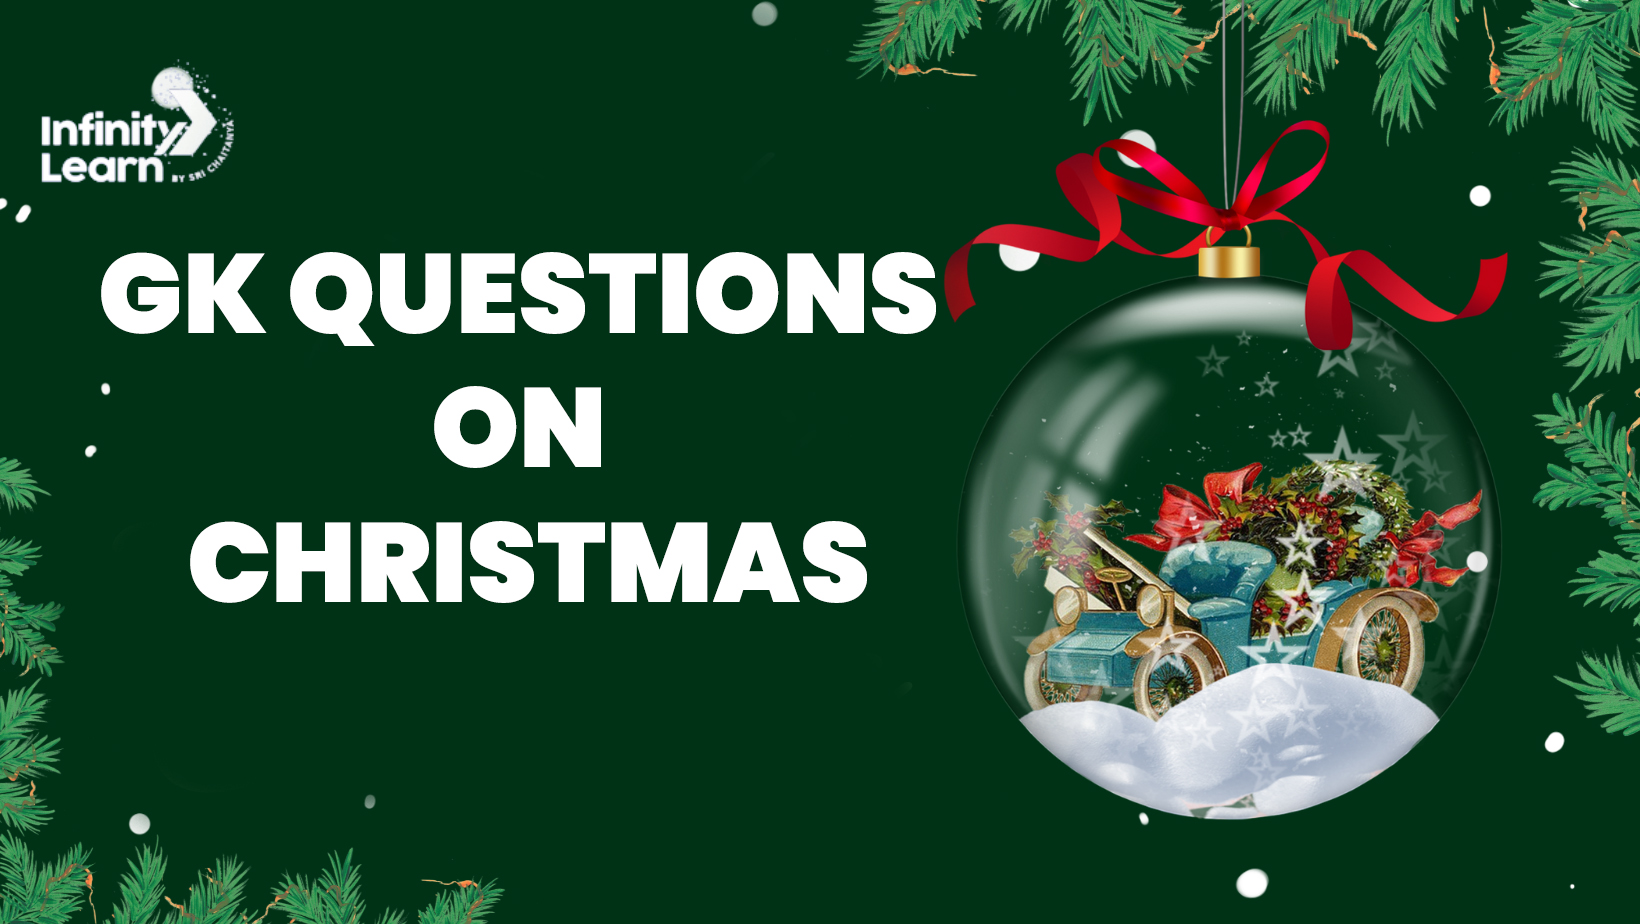 GK Questions on Christmas